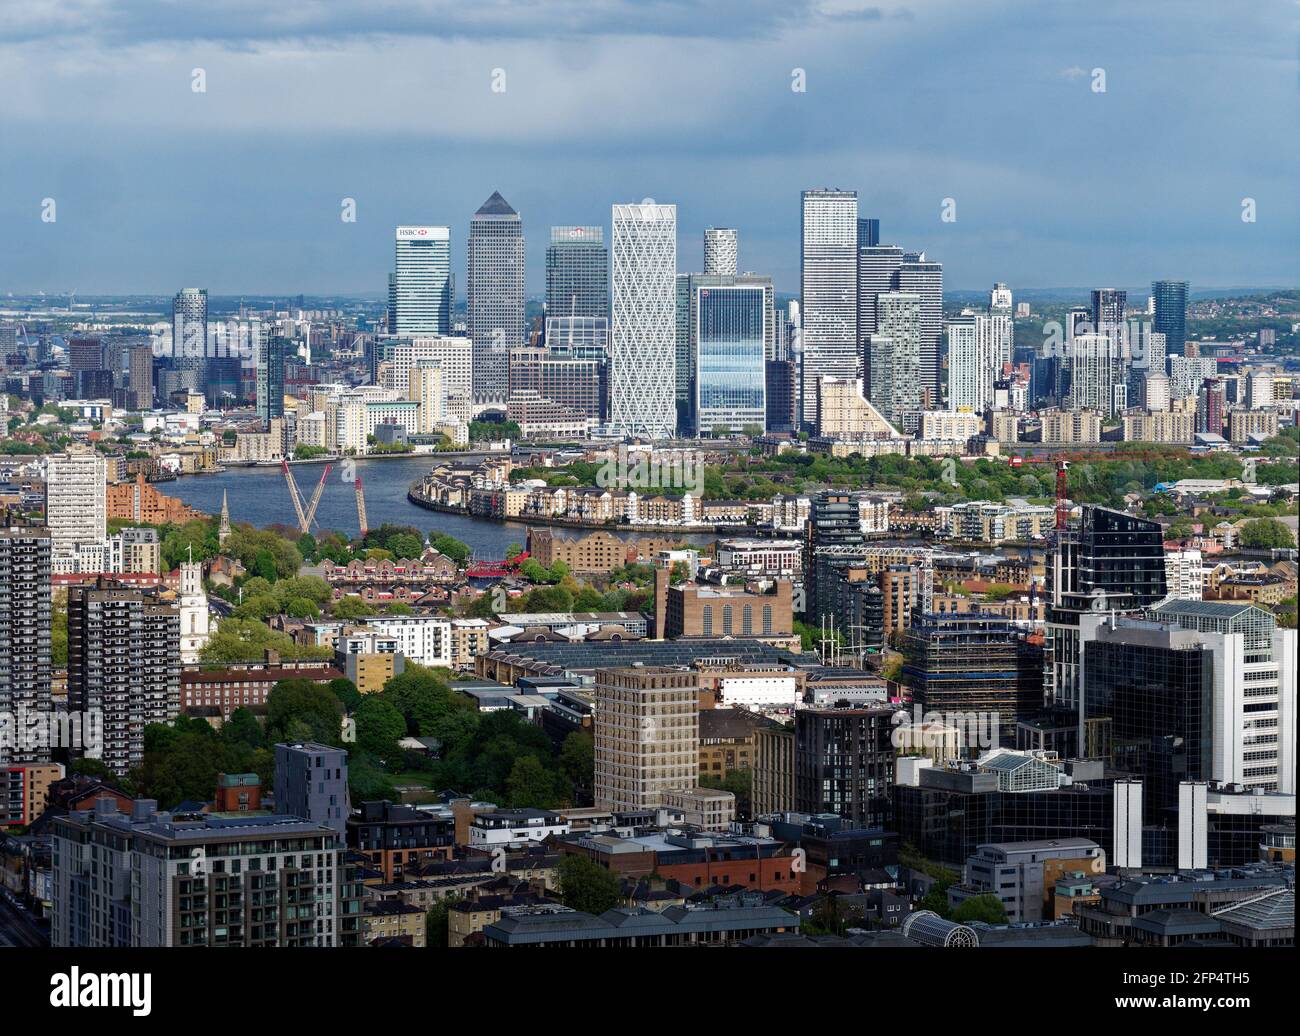 London, Greater London, England - May 18 2021: Elevated view across the River Thames towards the famous skyscrapers in the business district of Canary Stock Photo